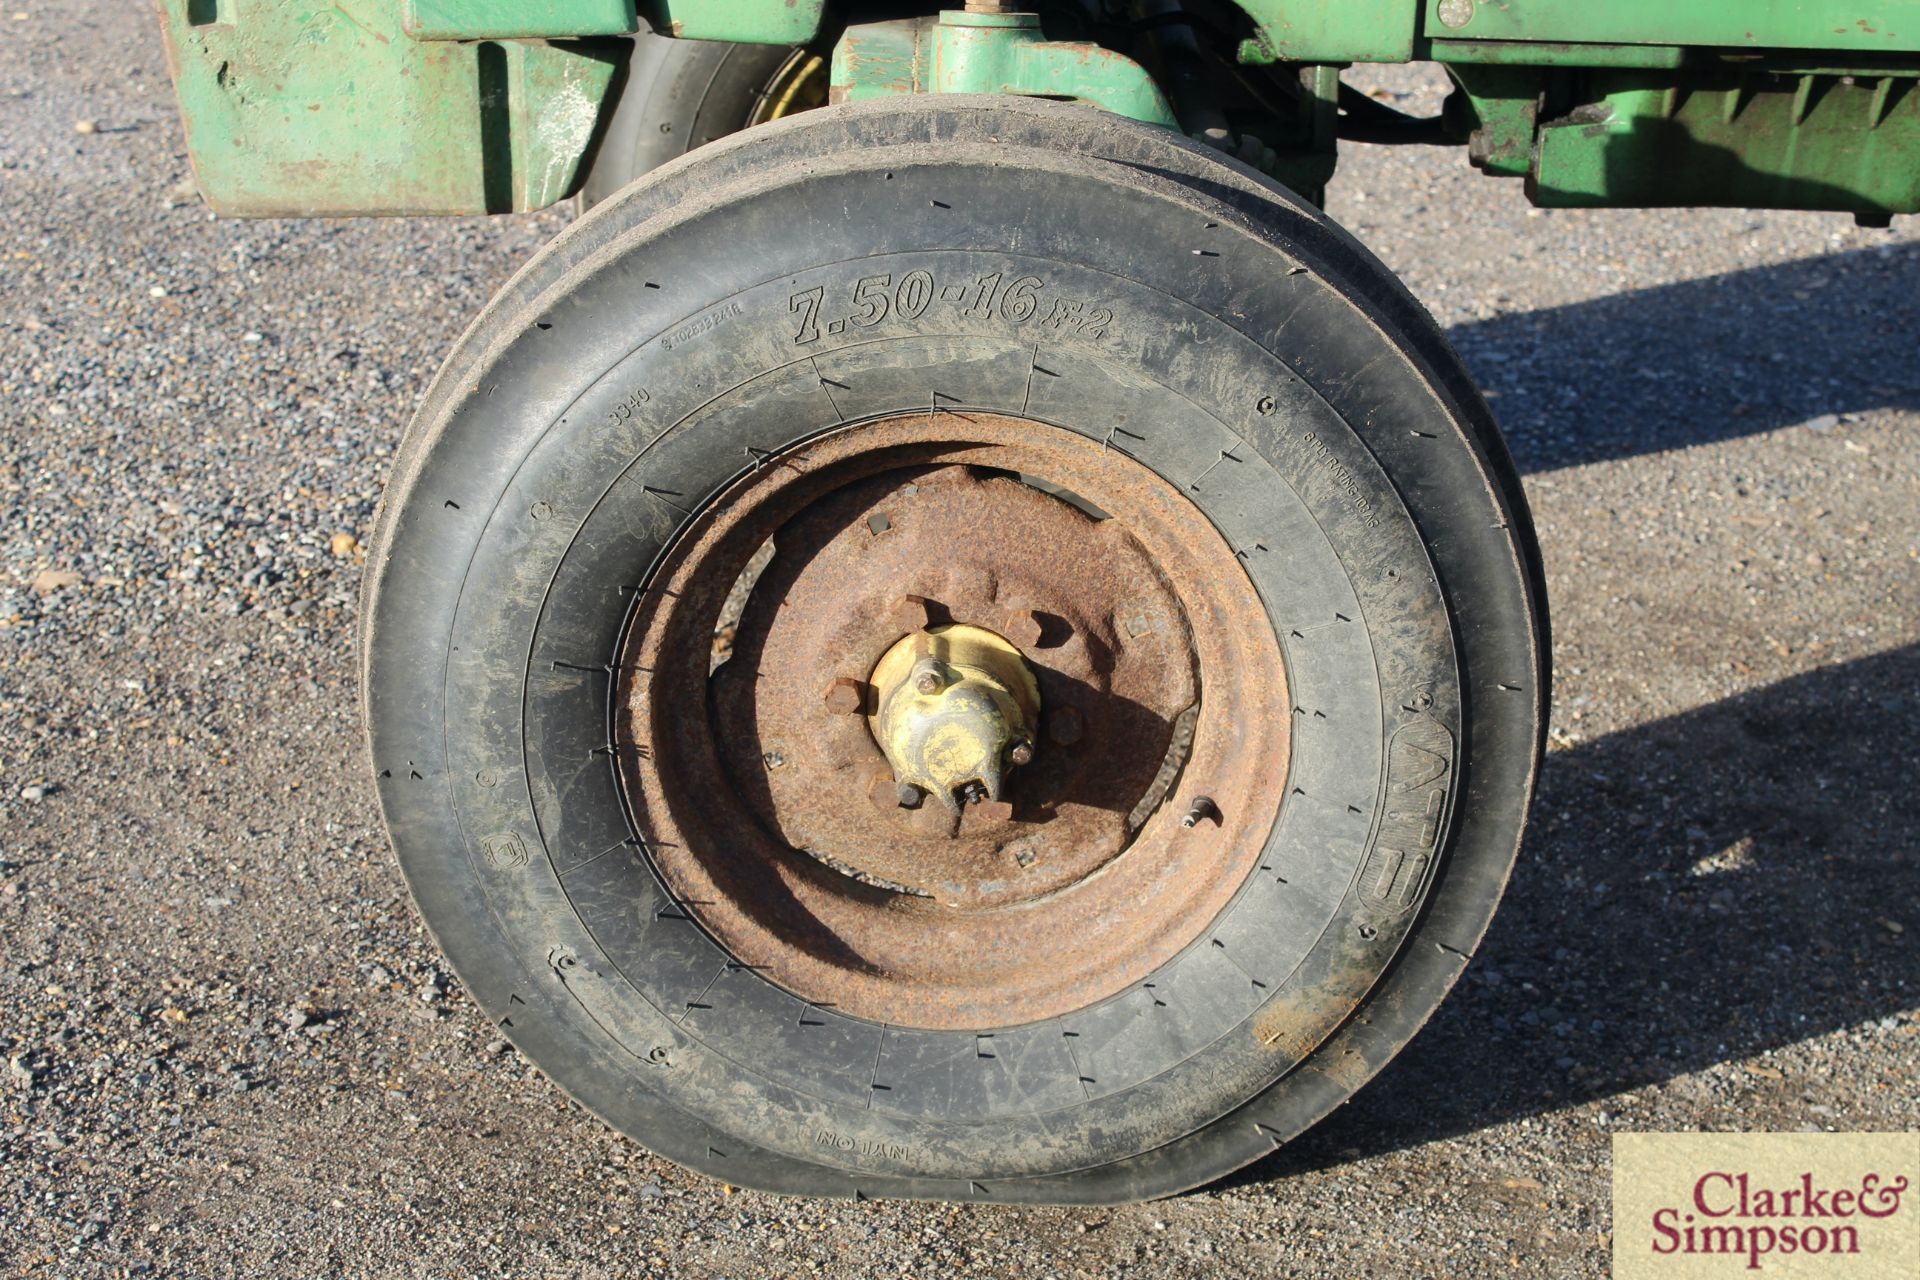 John Deere 1640 2WD tractor. Registration ETH 628V. 1980. 5,328 hours. 13.6R36 rear wheels and - Image 12 of 42